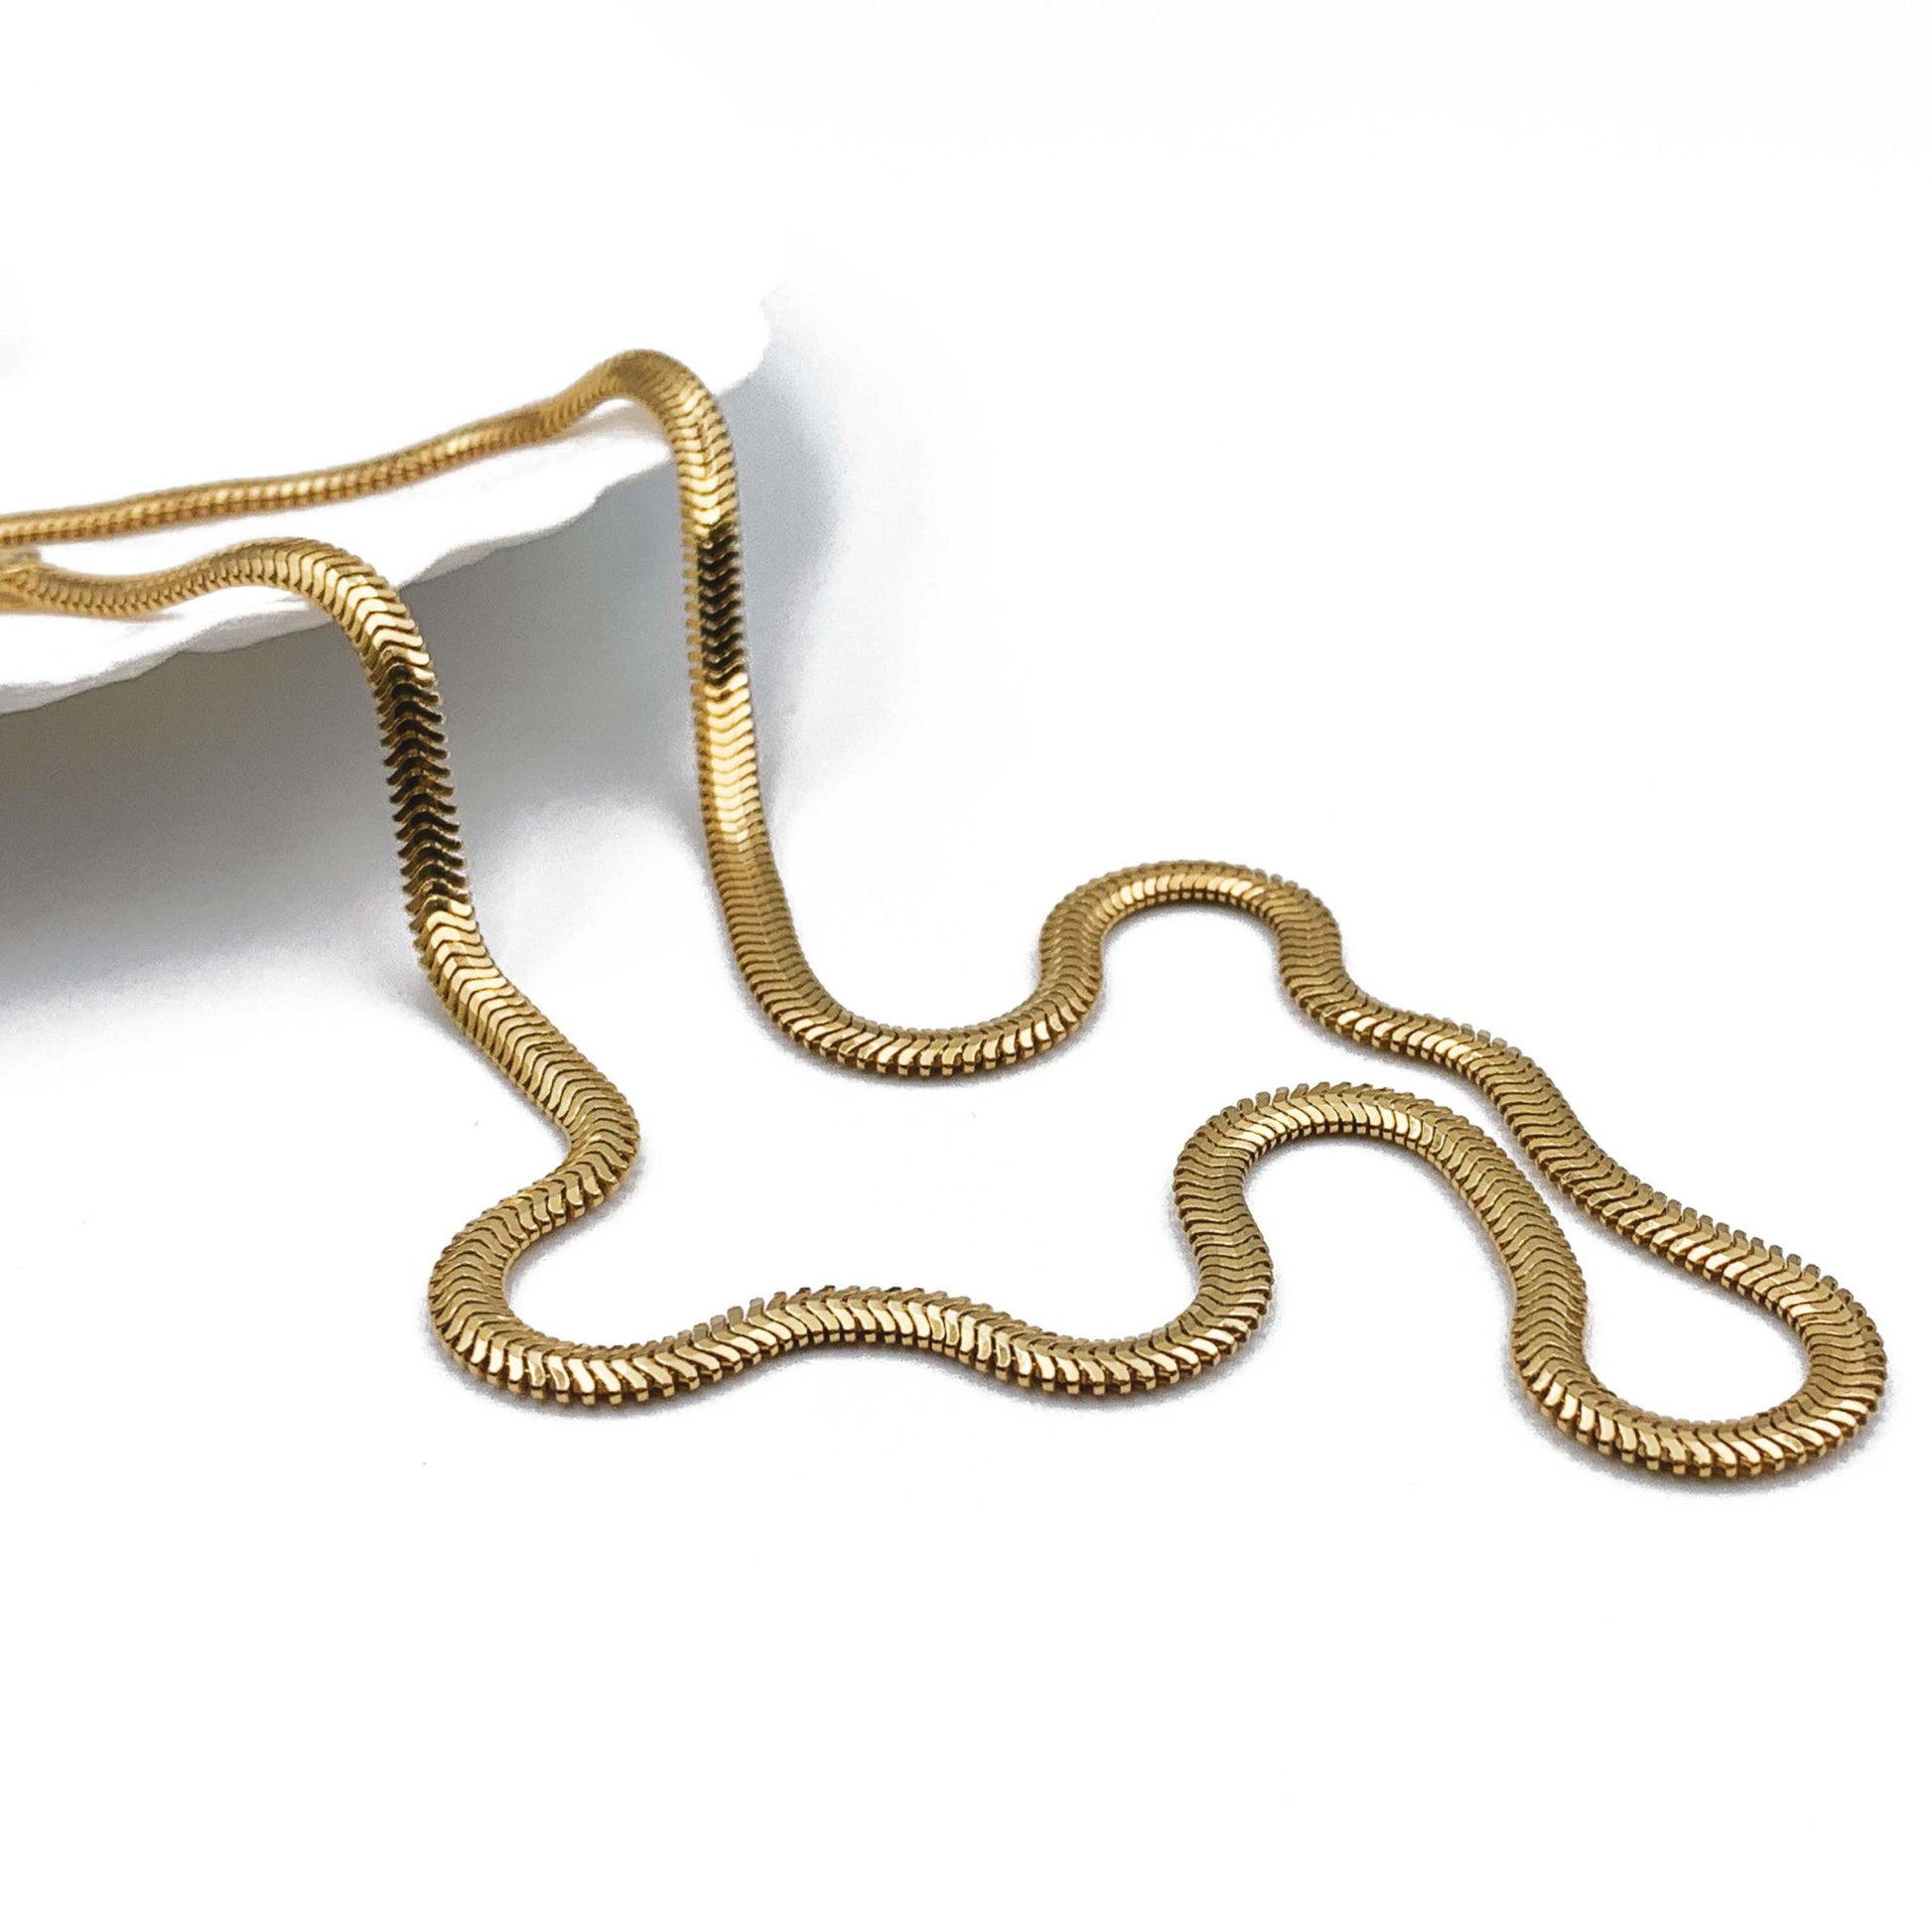 Serpent necklace - gold plated snake chain necklace 